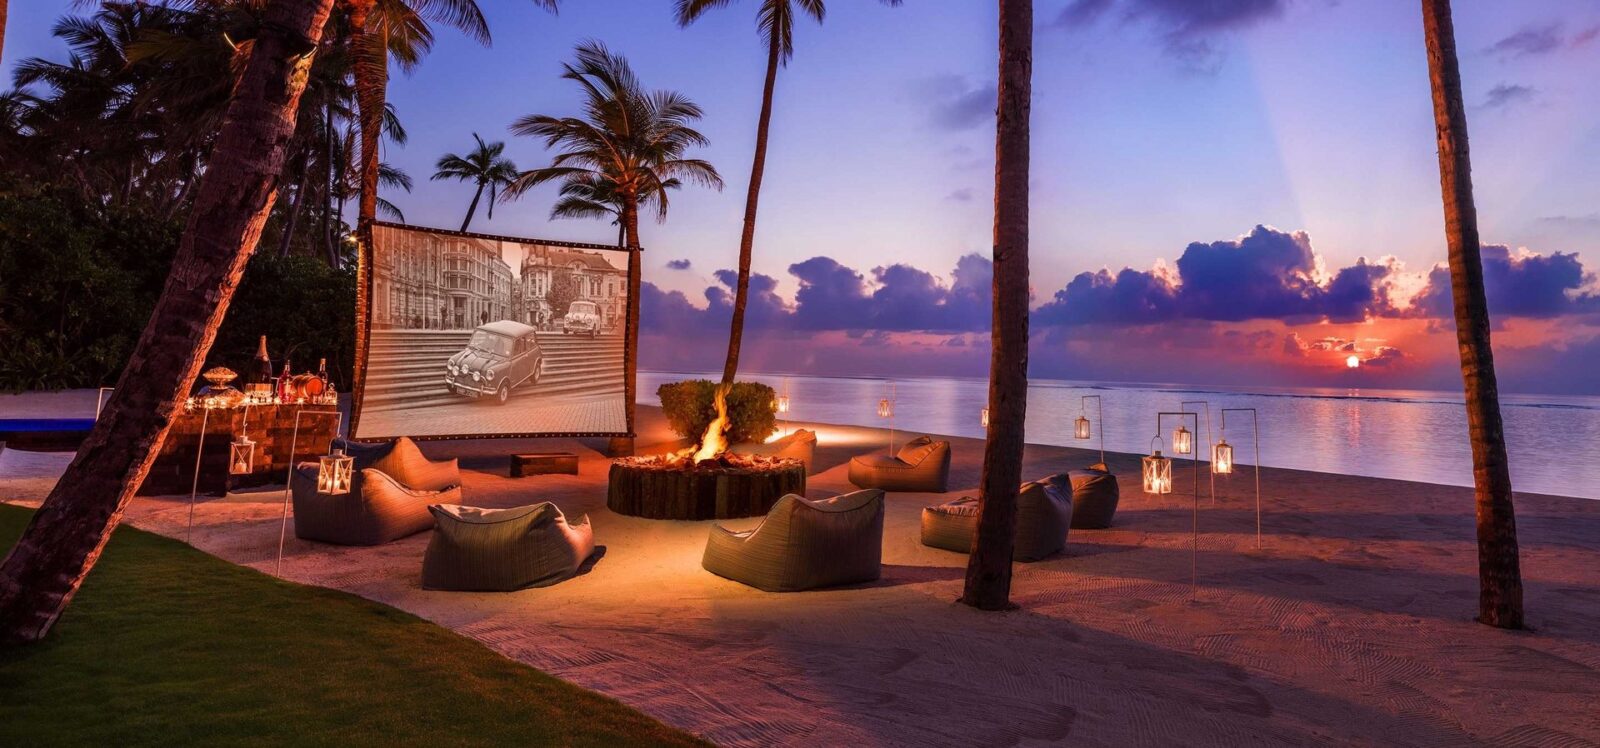 oorr_grand-sunset-residence_private-outdoor-cinema